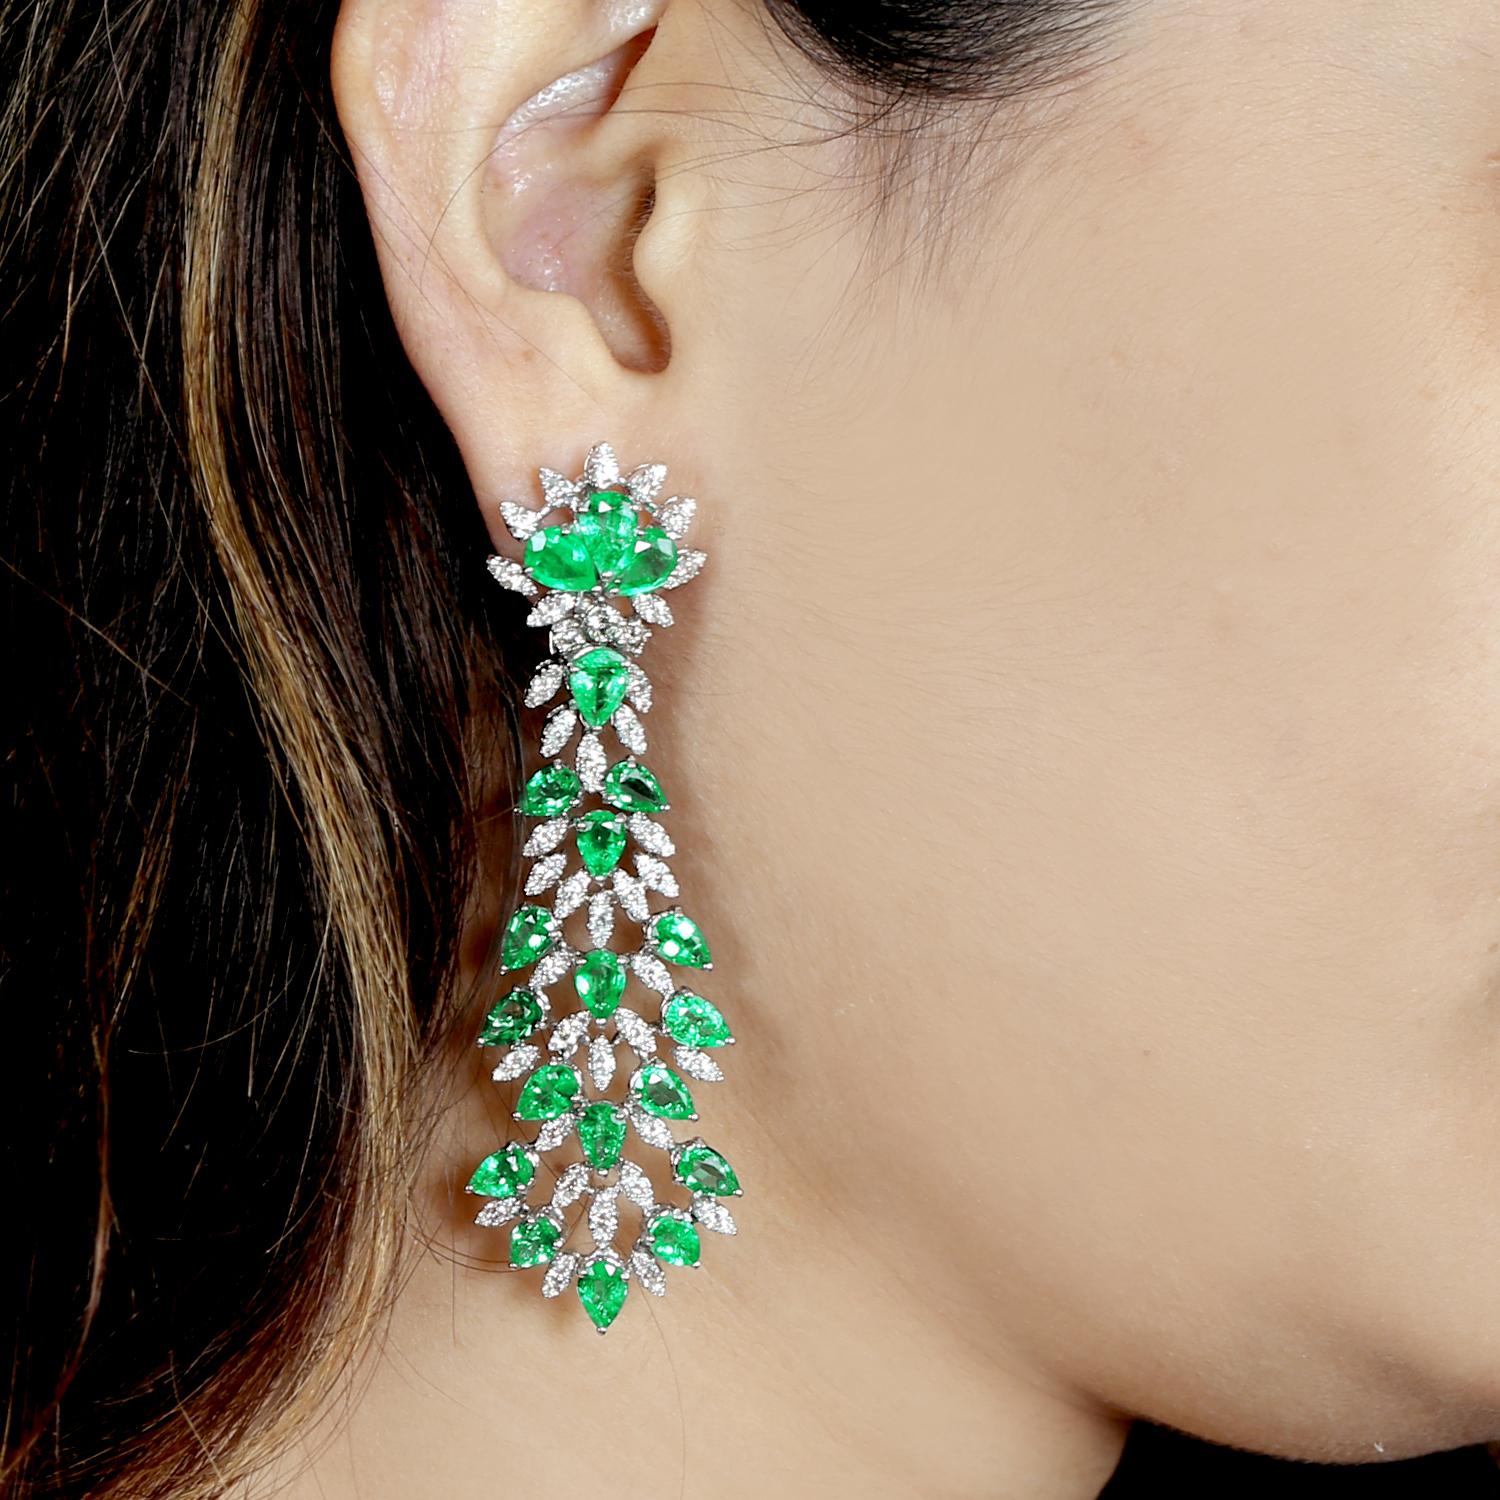 Cast in 14 karat gold, these exquisite earrings are hand set with 16.75 carats emerald and 3.26 carats of glimmering diamonds. 

FOLLOW MEGHNA JEWELS storefront to view the latest collection & exclusive pieces. Meghna Jewels is proudly rated as a